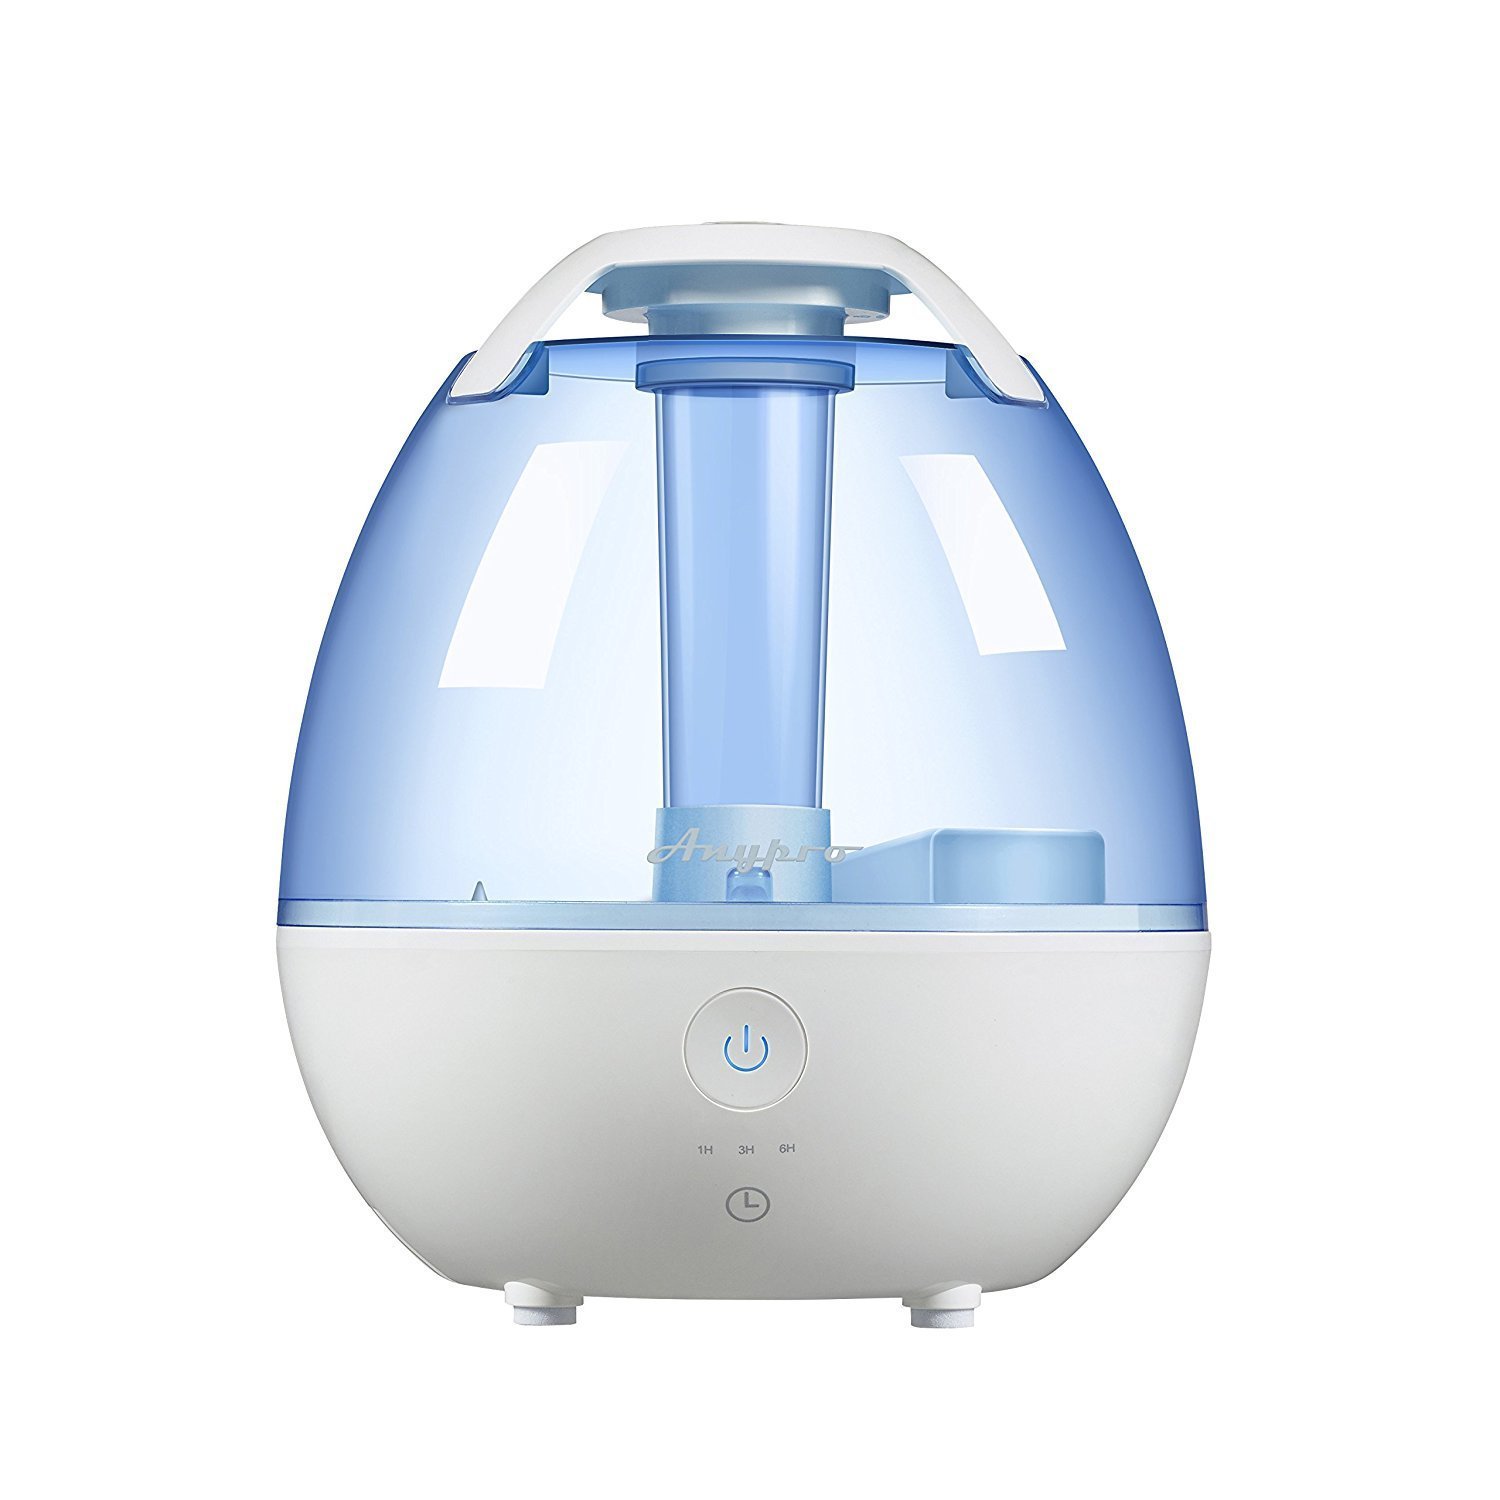 Top 5 Best Selling Humidifiers